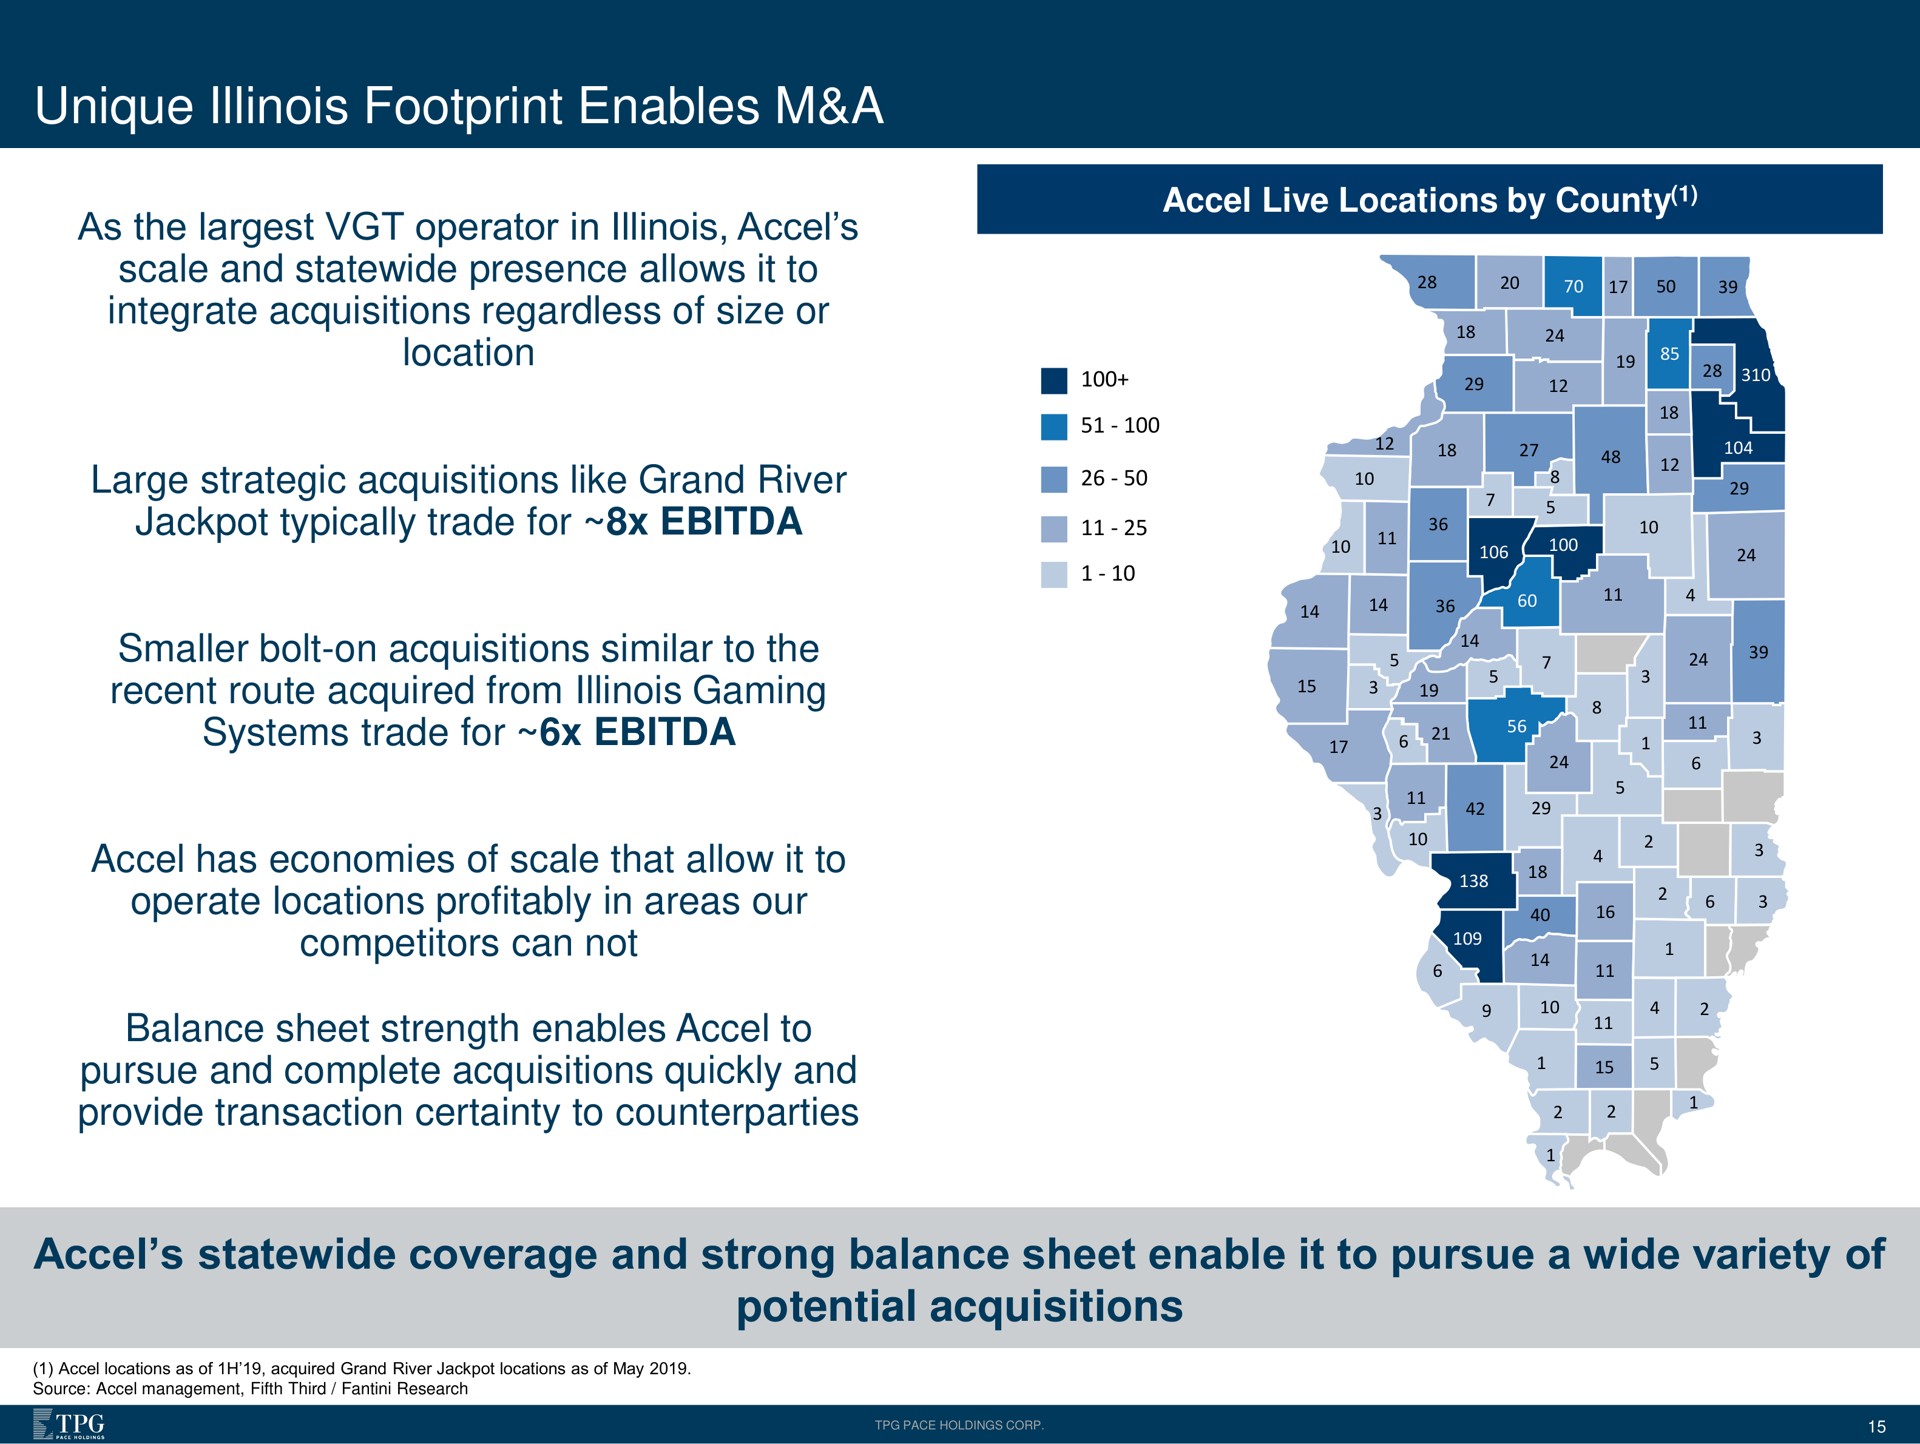 unique footprint enables a coverage and strong balance sheet enable it to pursue a wide variety of potential acquisitions live locations by county scale presence allows integrate regardless size or location large strategic like grand river typically trade for smaller bolt on similar the recent route acquired from gaming systems trade for has economies scale that allow operate locations profitably in areas our competitors can not strength complete quickly provide transaction certainty | Accel Entertaiment